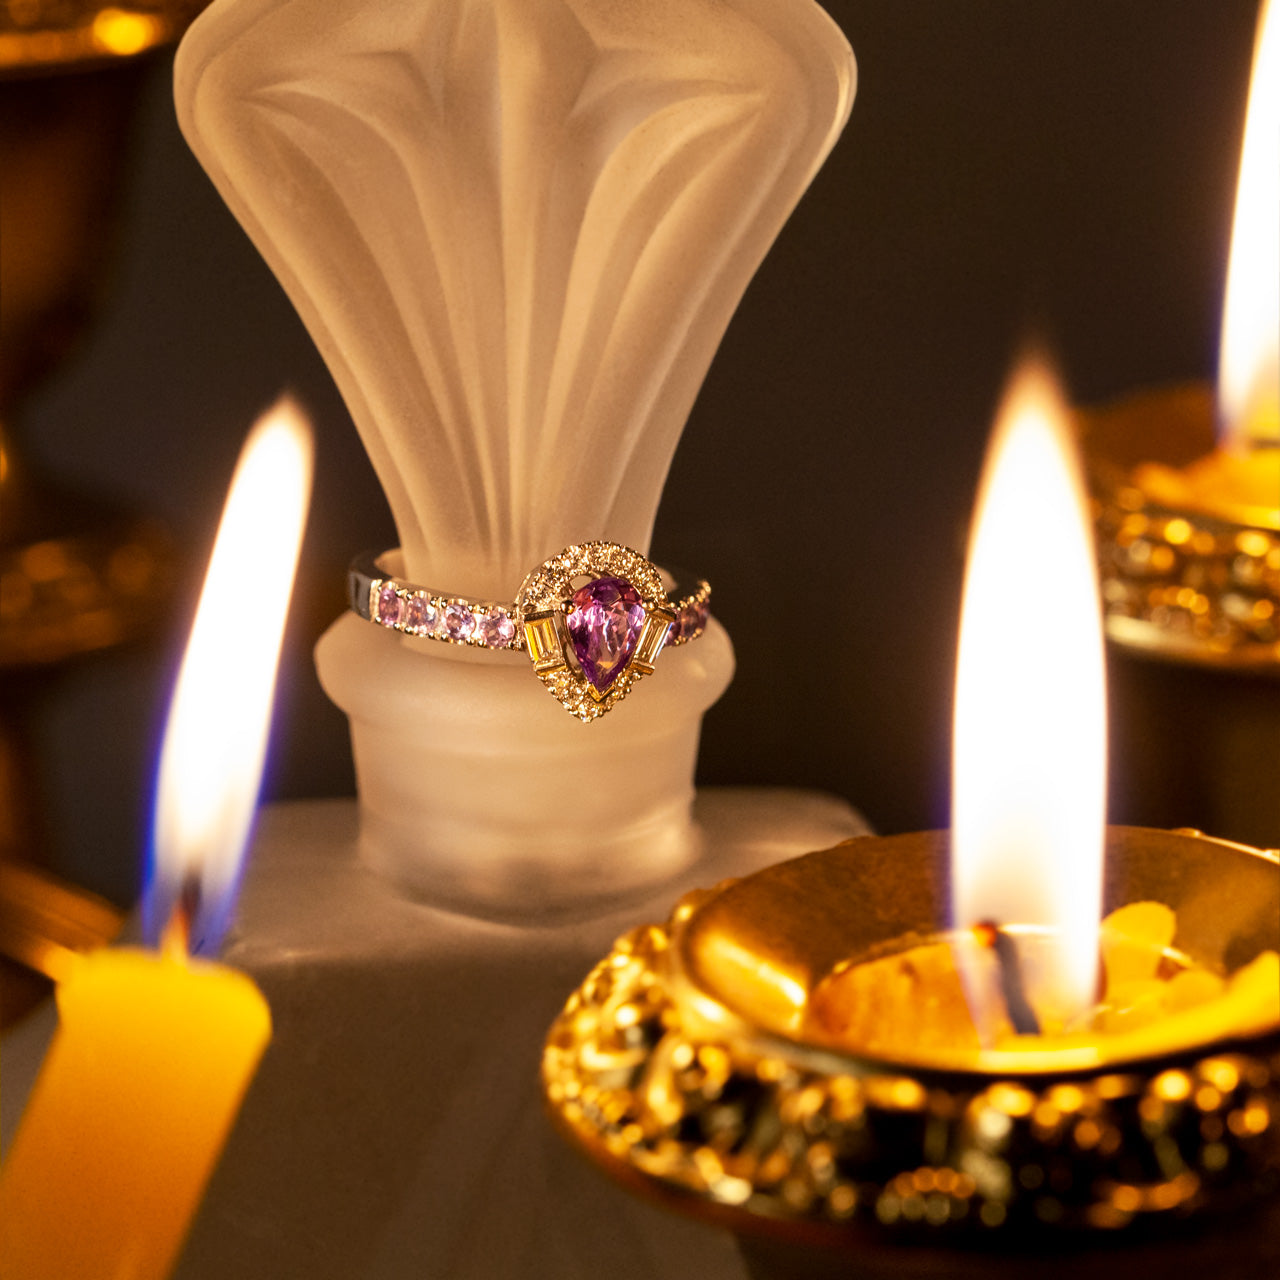 A 0.57ct alexandrite platinum ring resting atop a candle, showcasing its purple hue